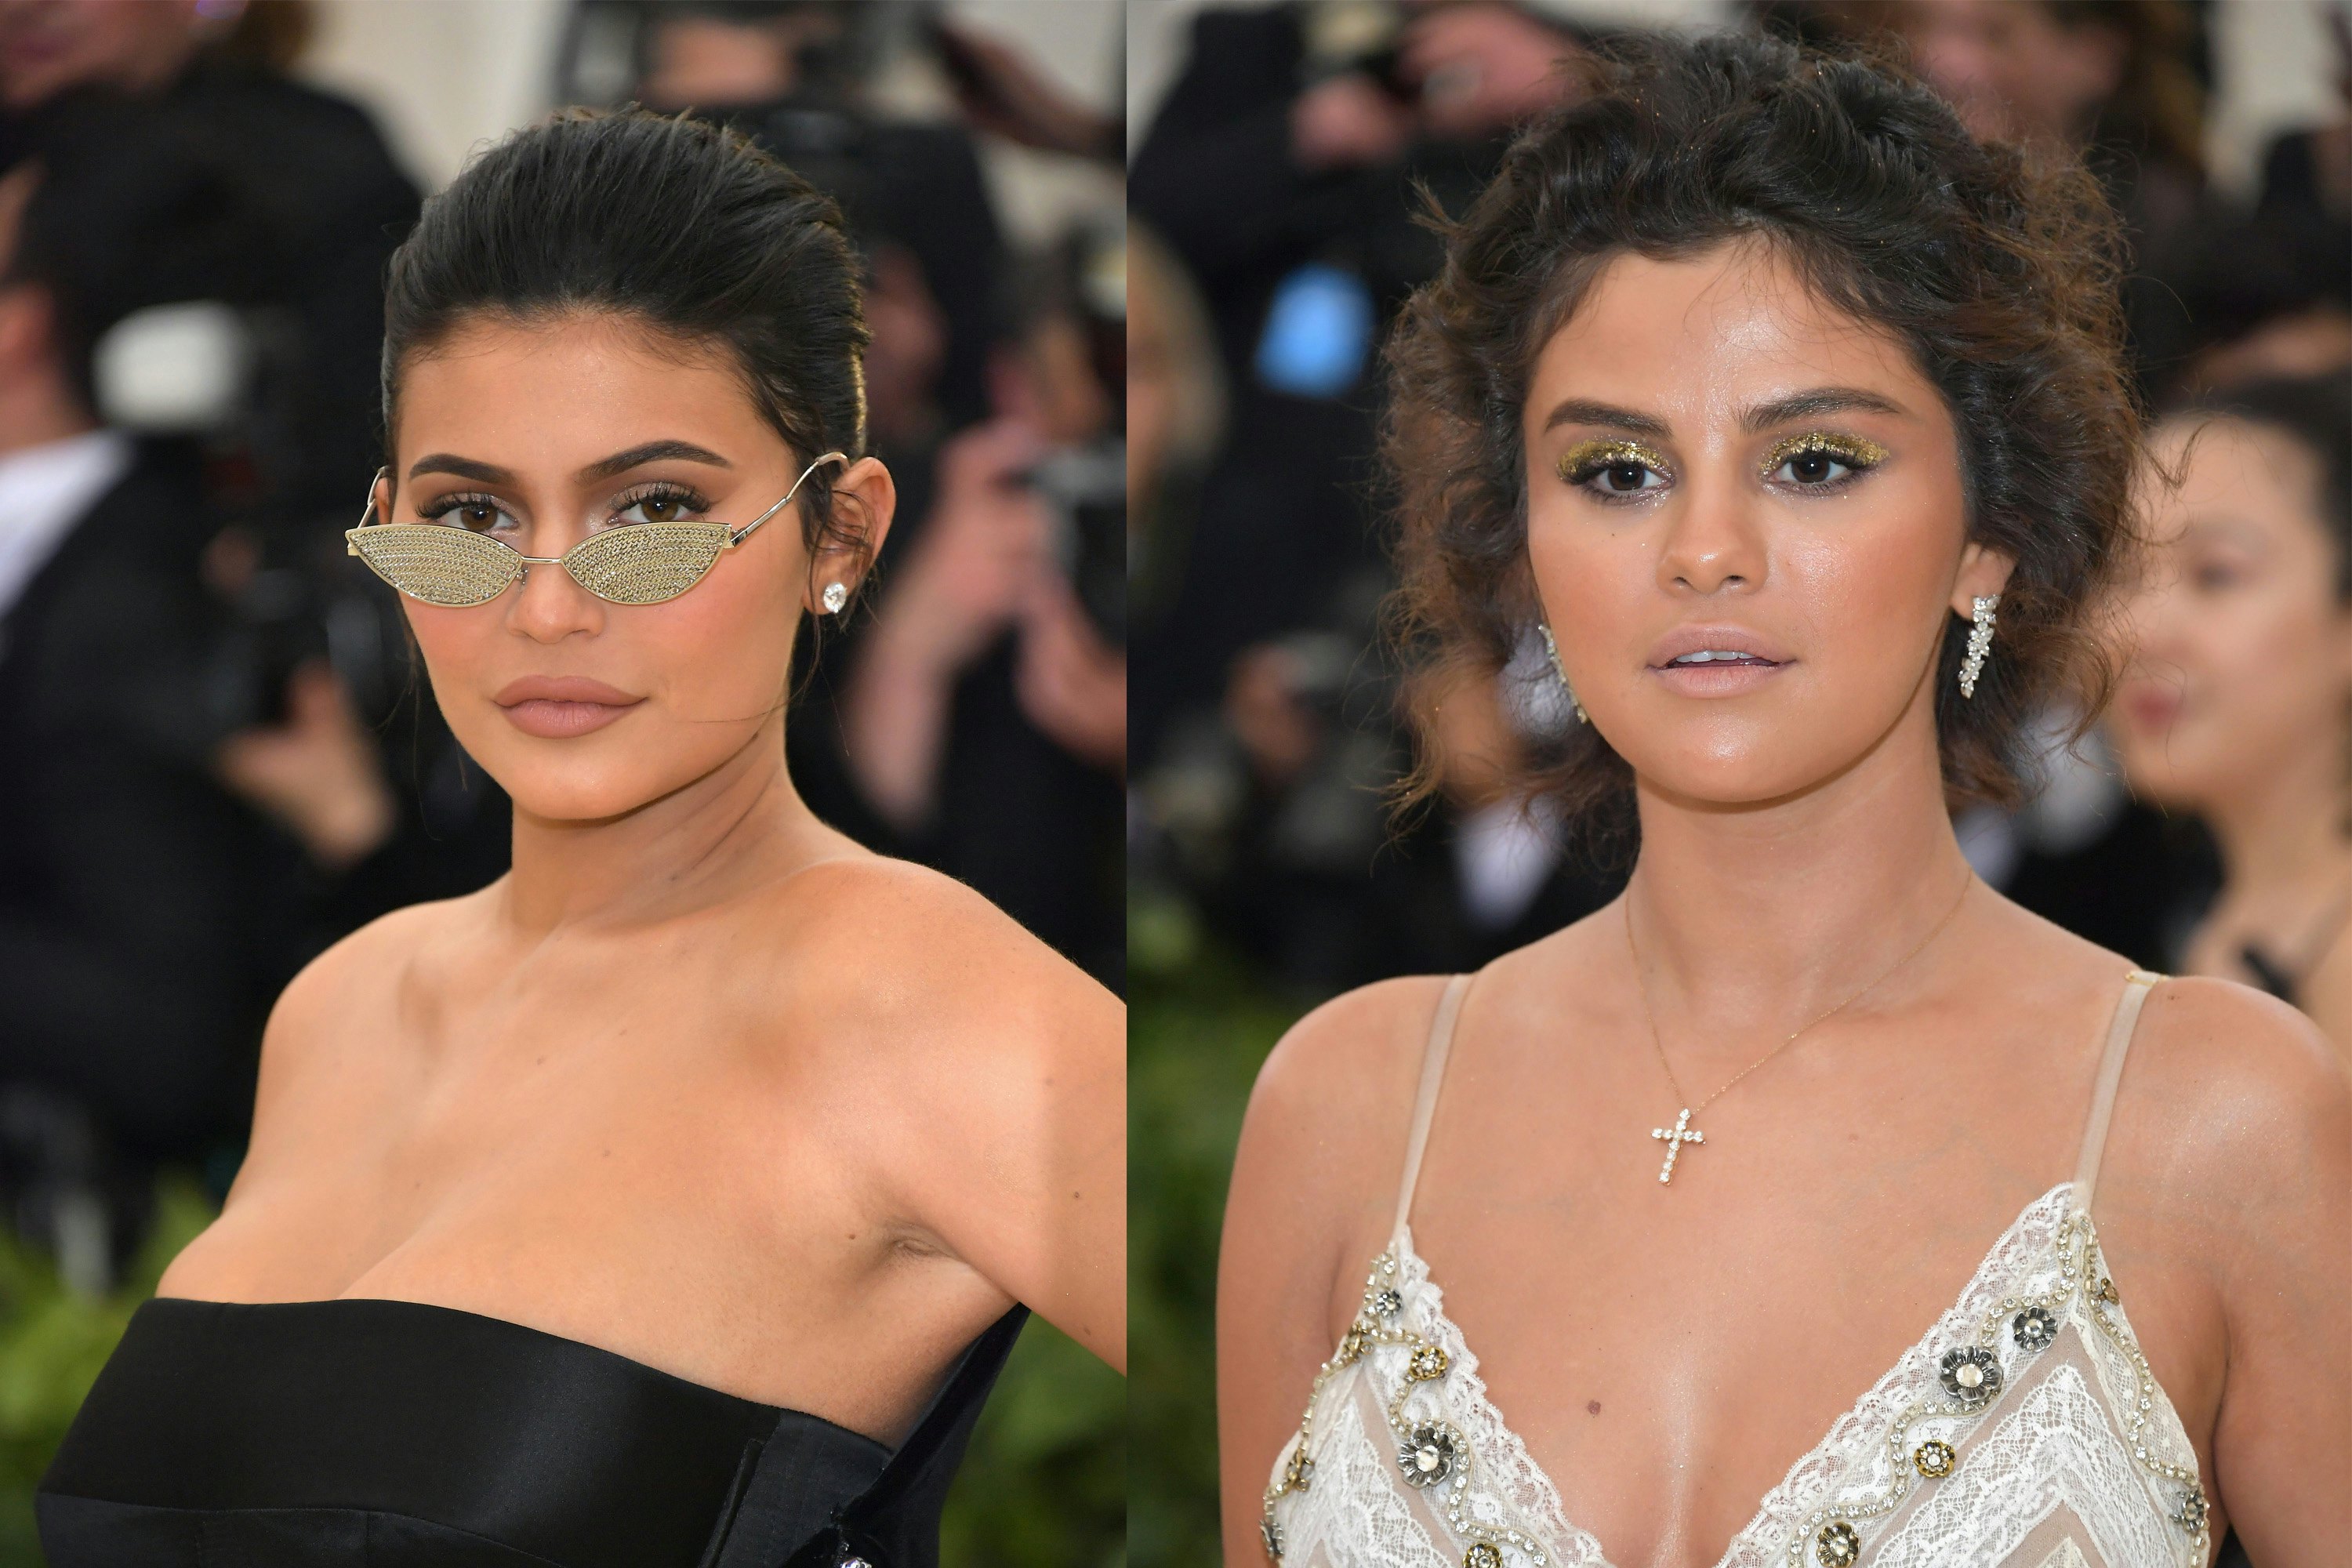 Kylie Jenner Selena Gomez Reunited At The Met Gala After A